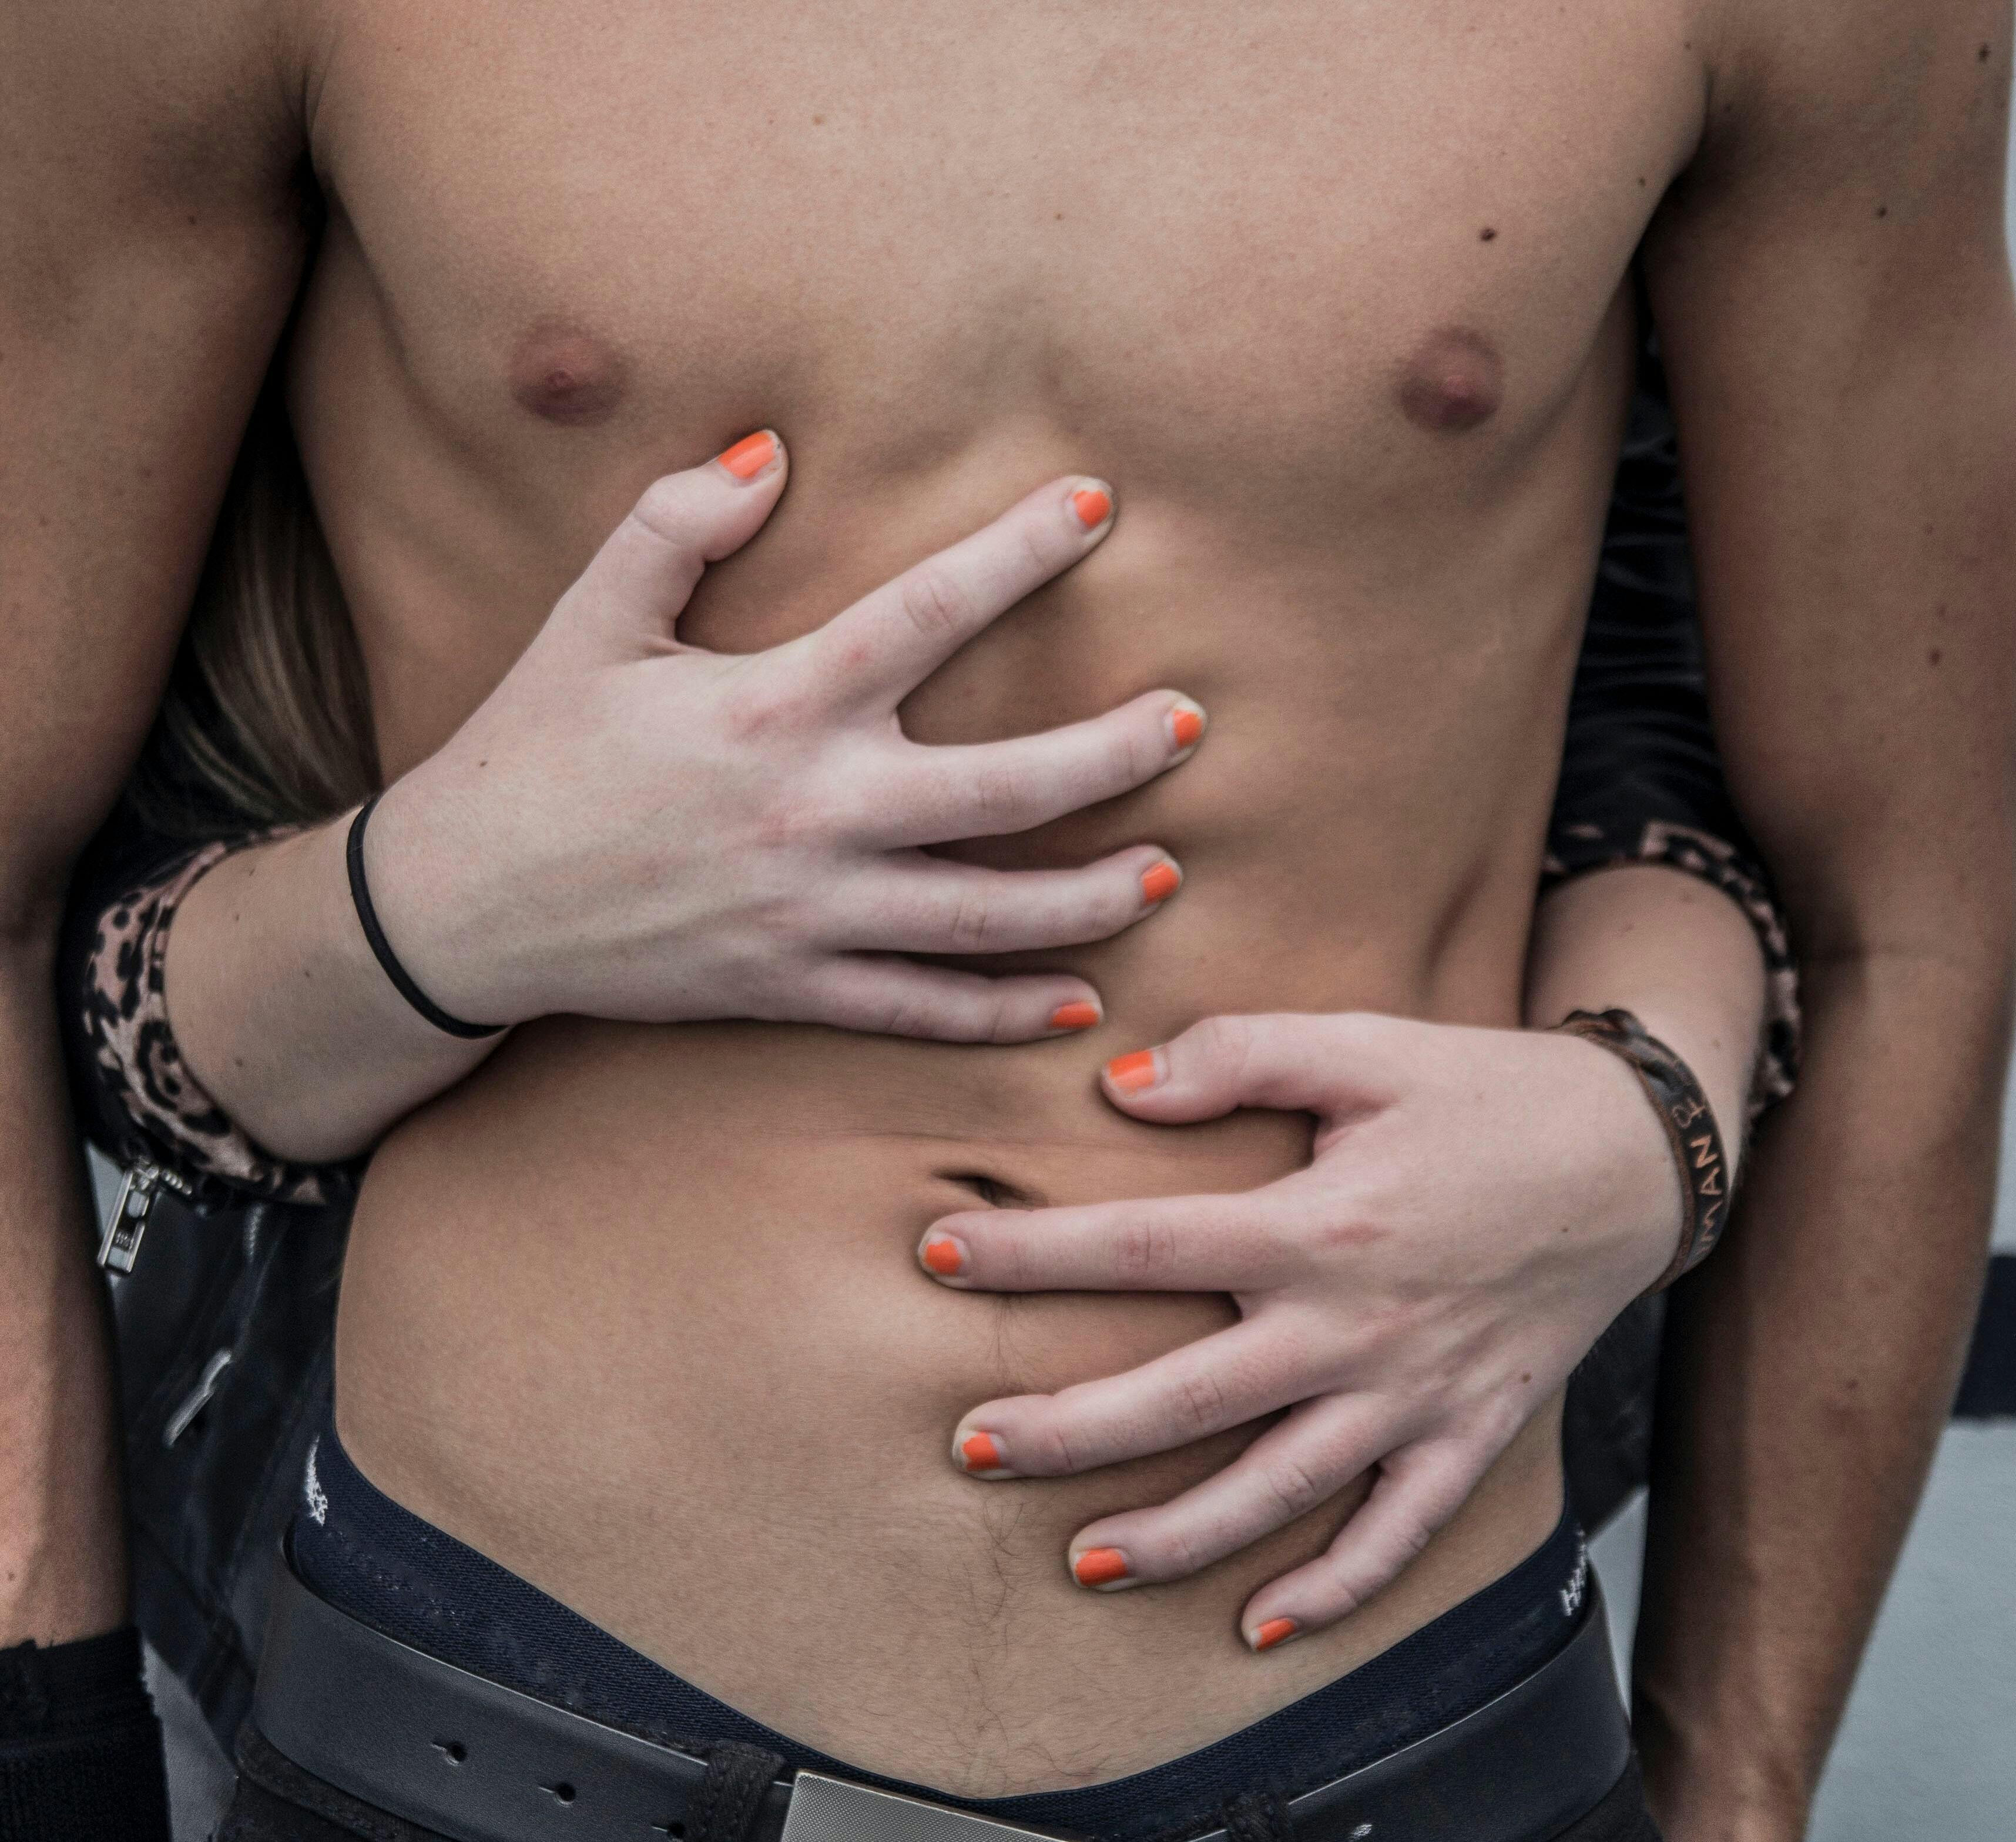 Woman's hands on a man's abdomen for Good Vibes